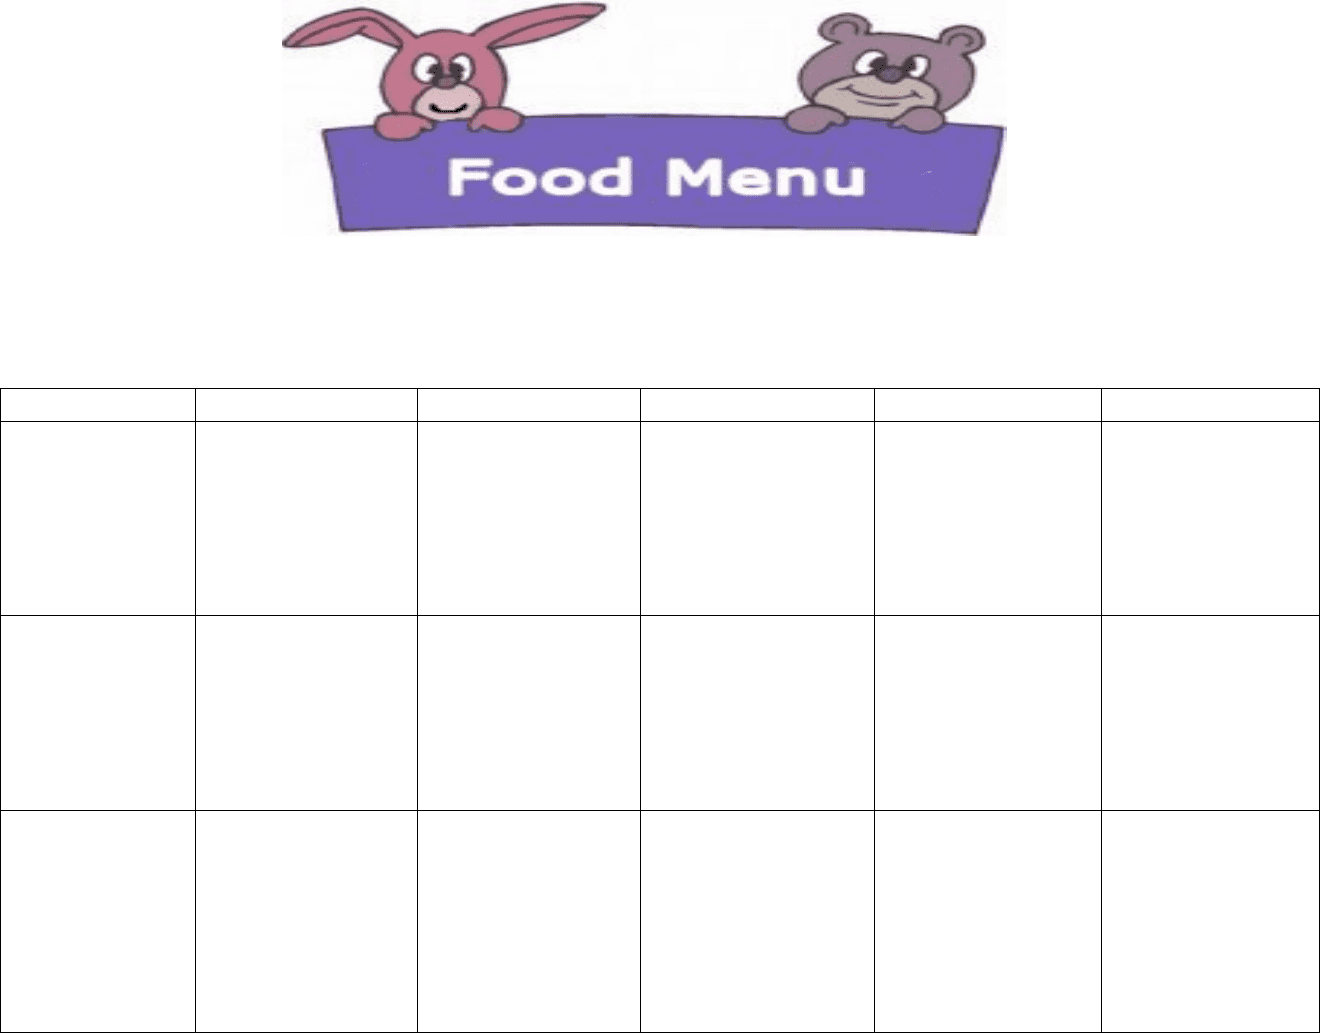 printable-fillable-weekly-menu-template-for-daycare